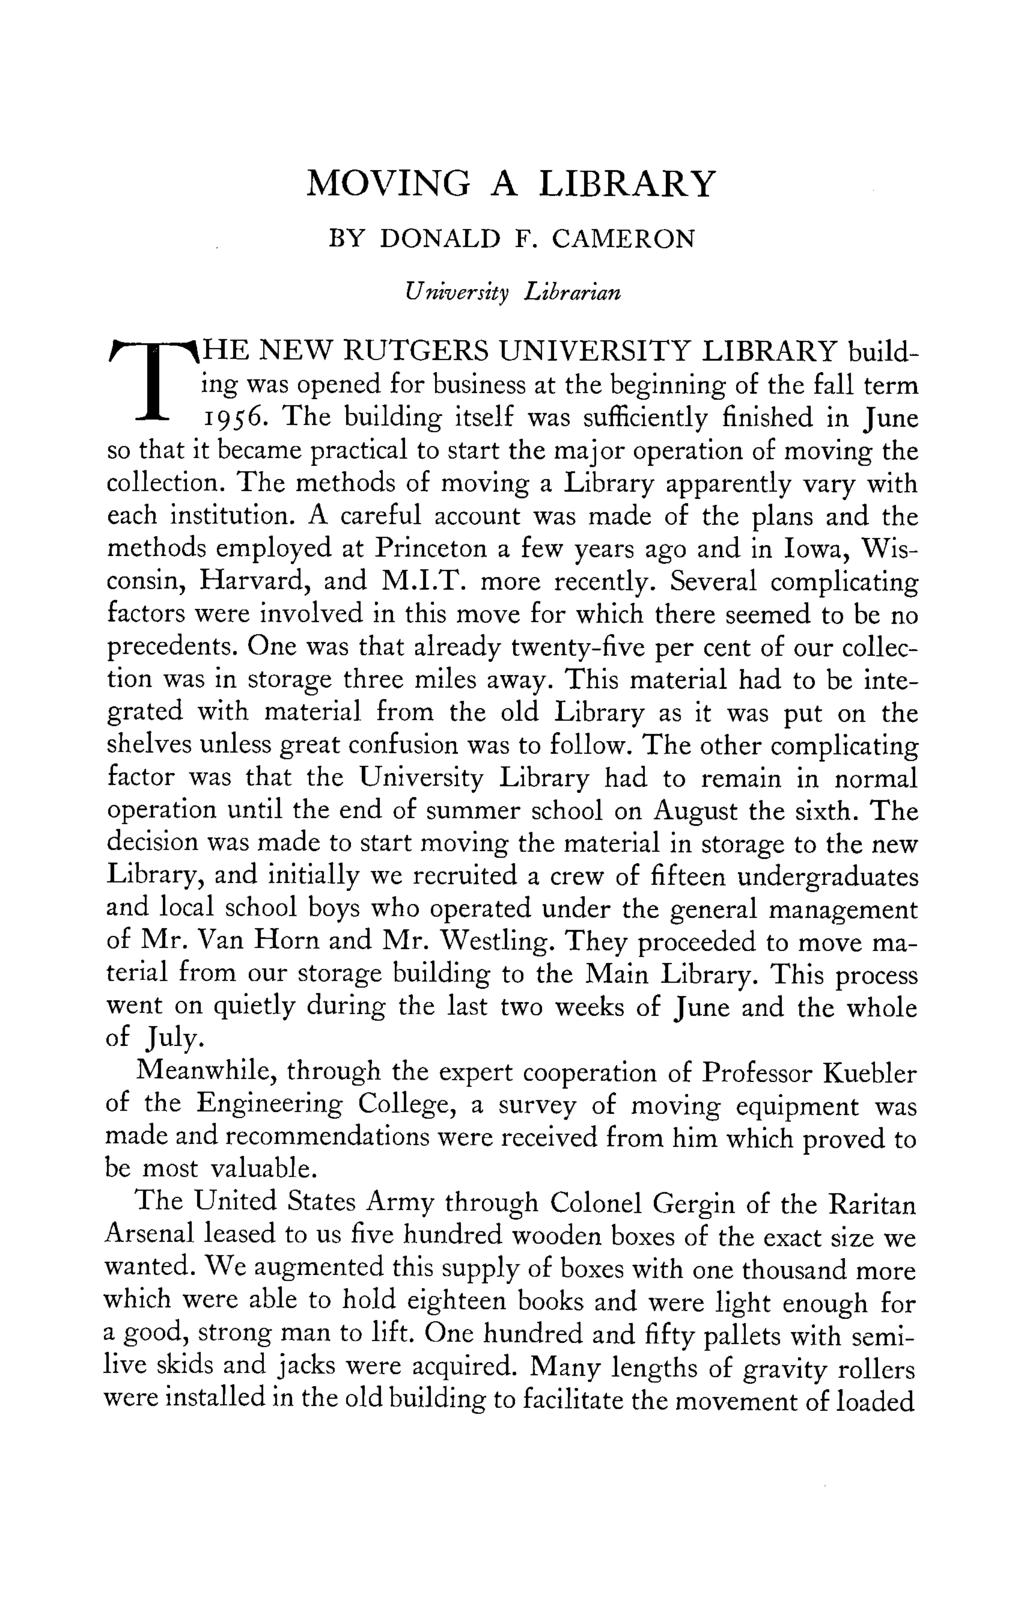 MOVING A LIBRARY BY DONALD F. CAMERON University Librarian THE NEW RUTGERS UNIVERSITY LIBRARY building was opened for business at the beginning of the fall term 1956.